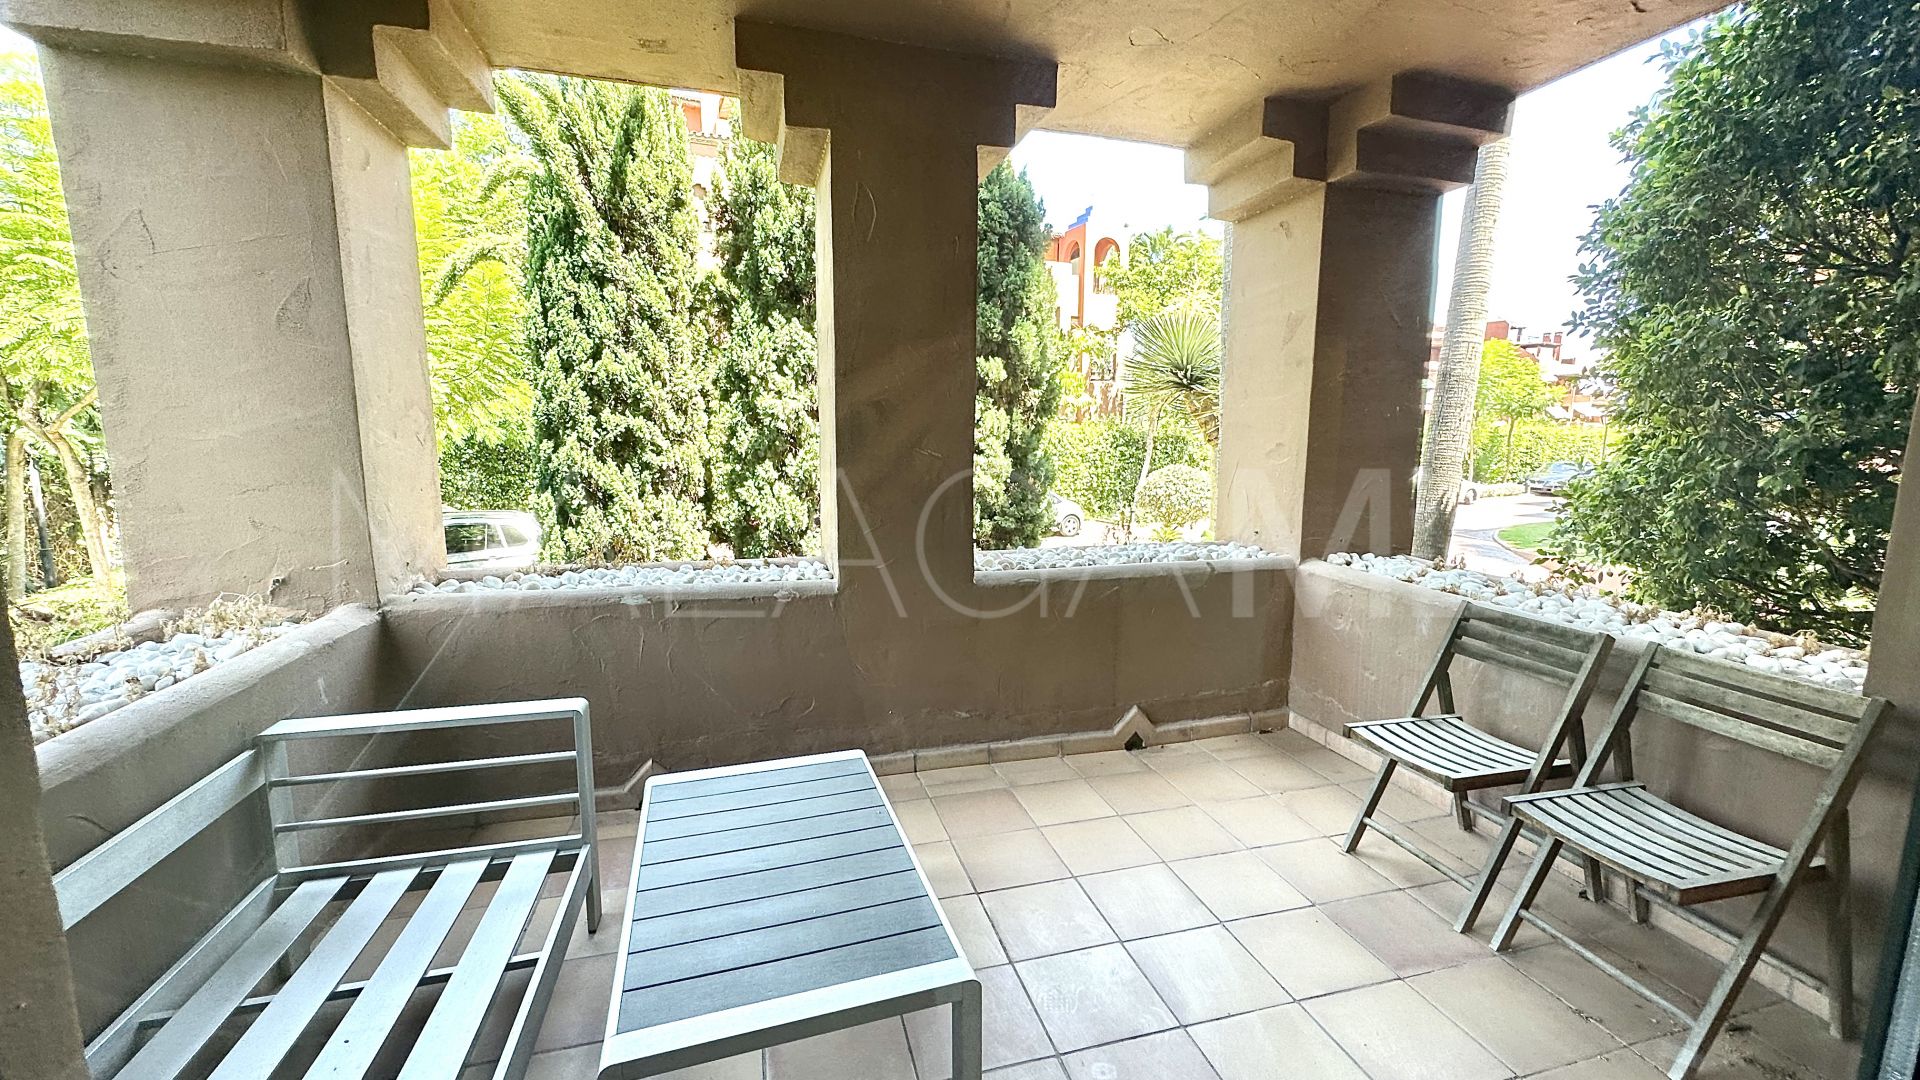 For sale Casasola 3 bedrooms ground floor apartment